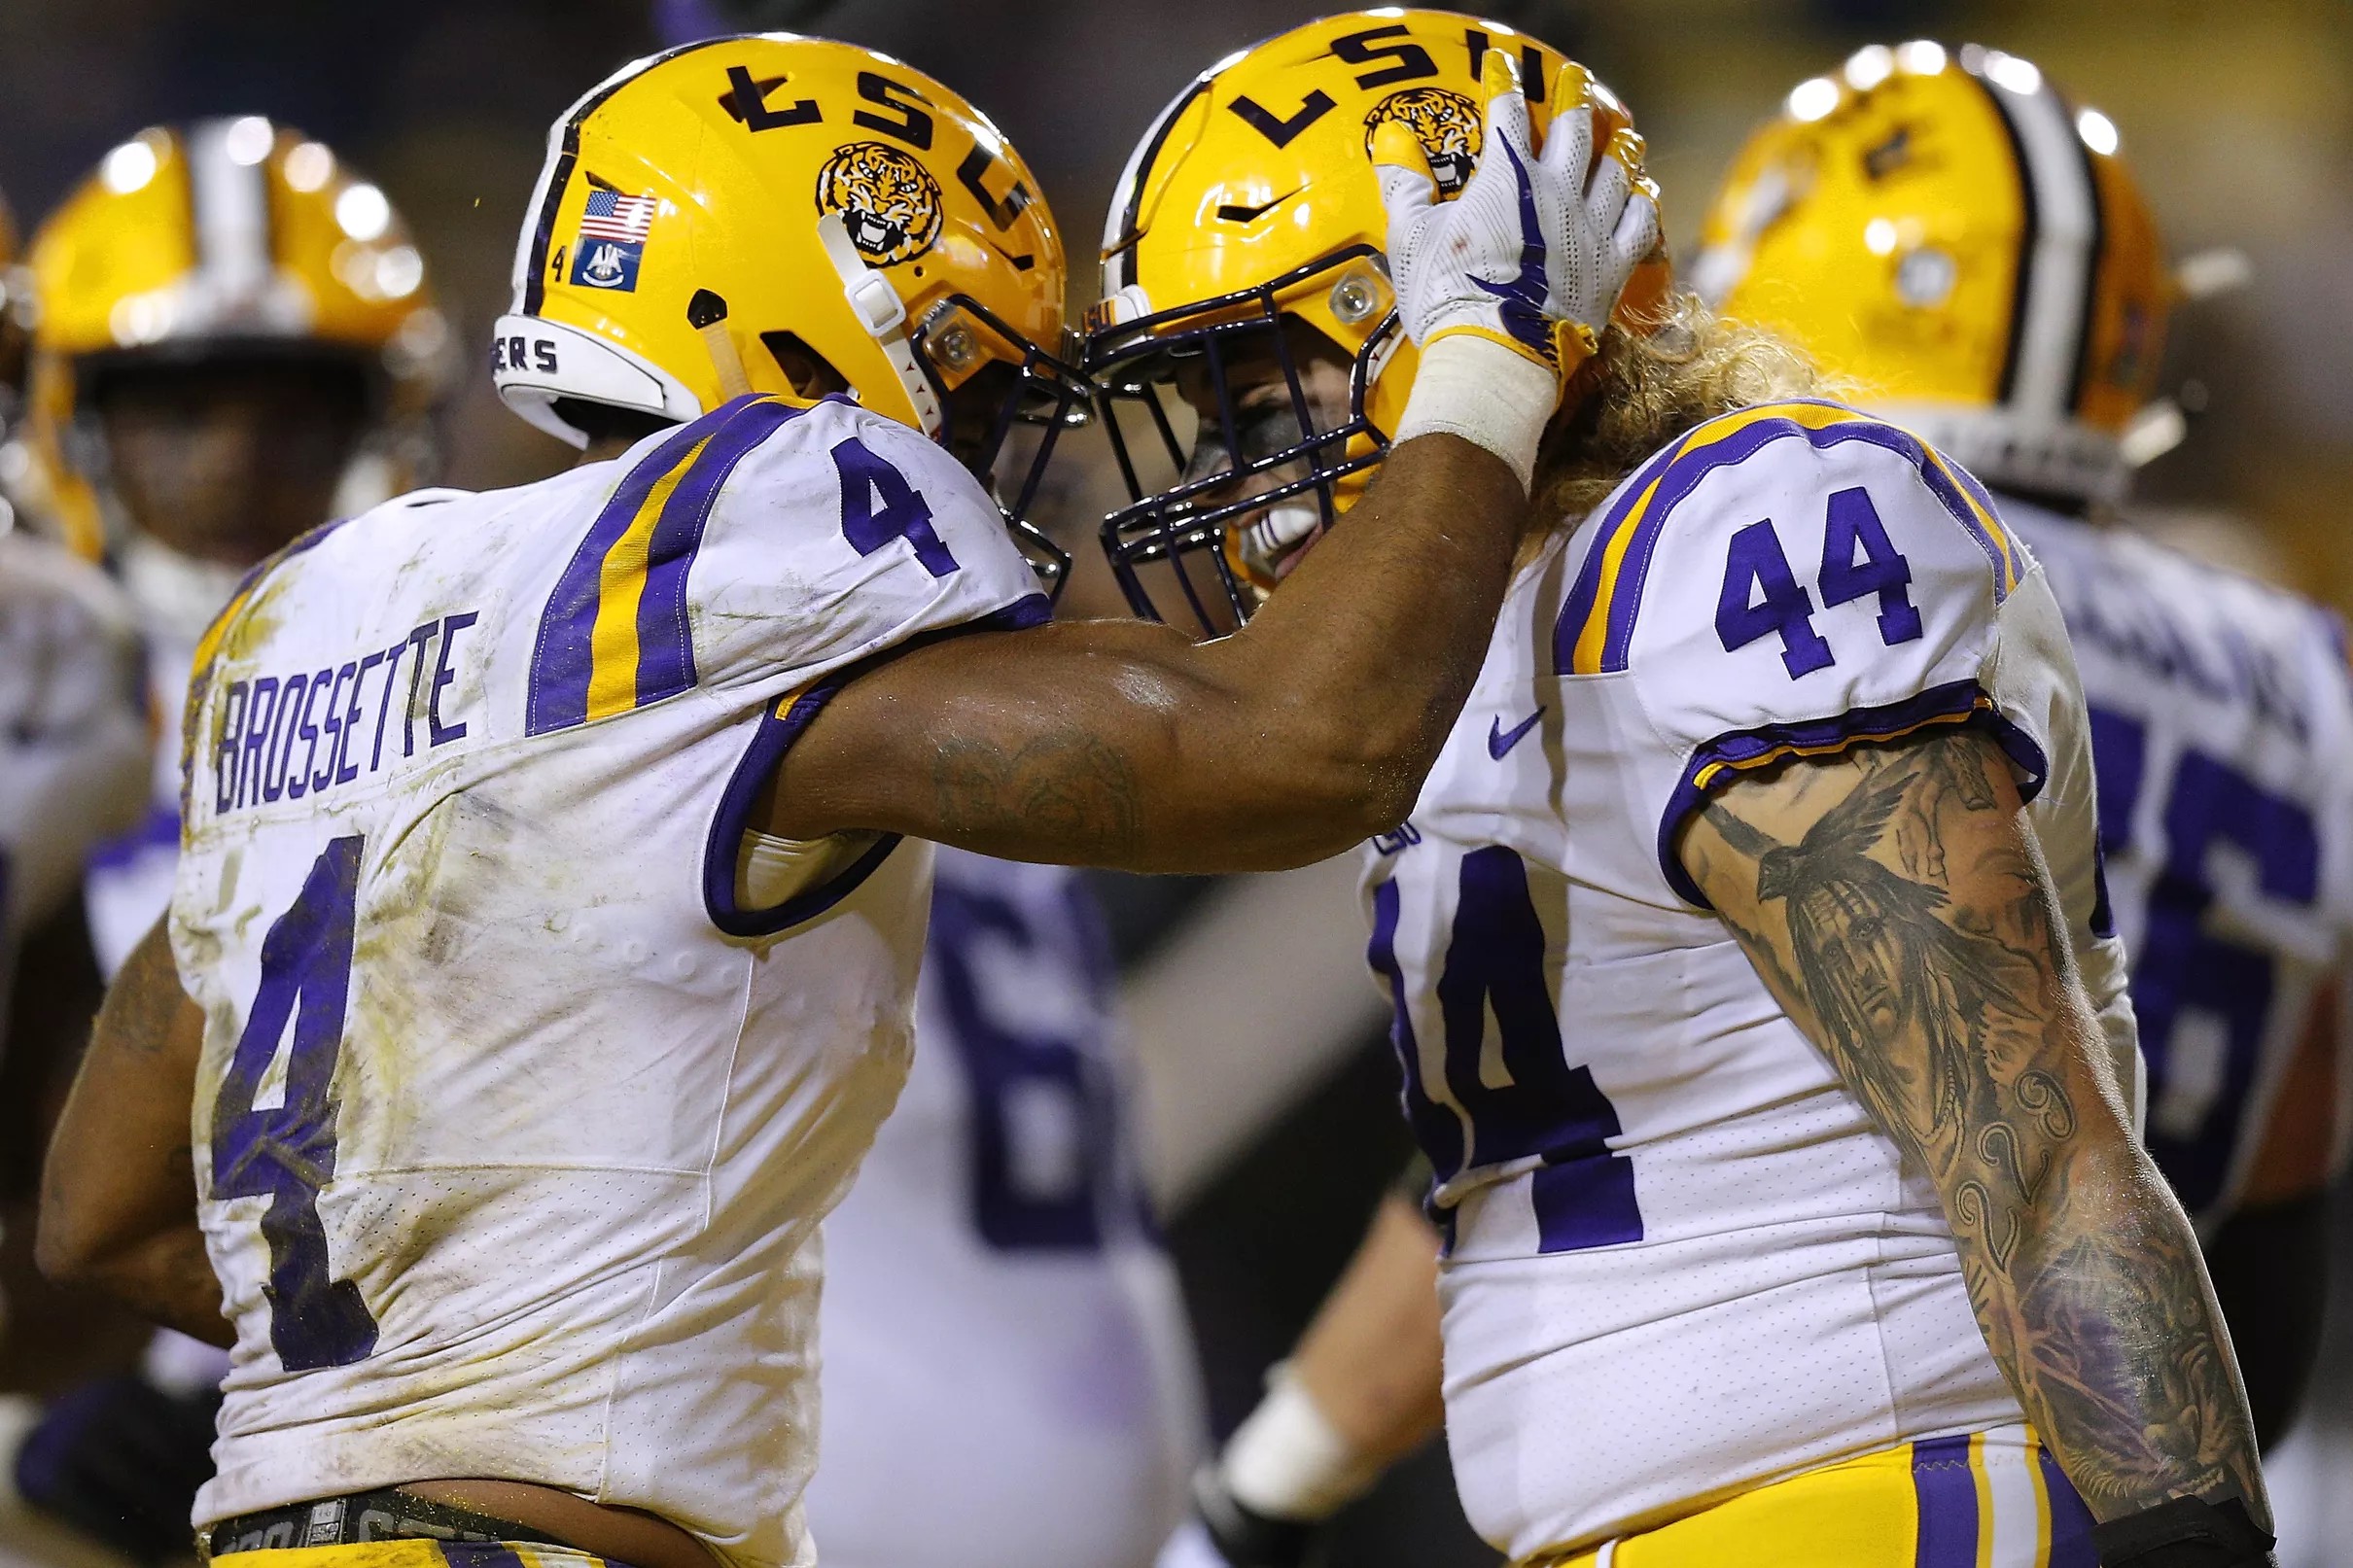 LSU vs. Texas A&M What to Watch For